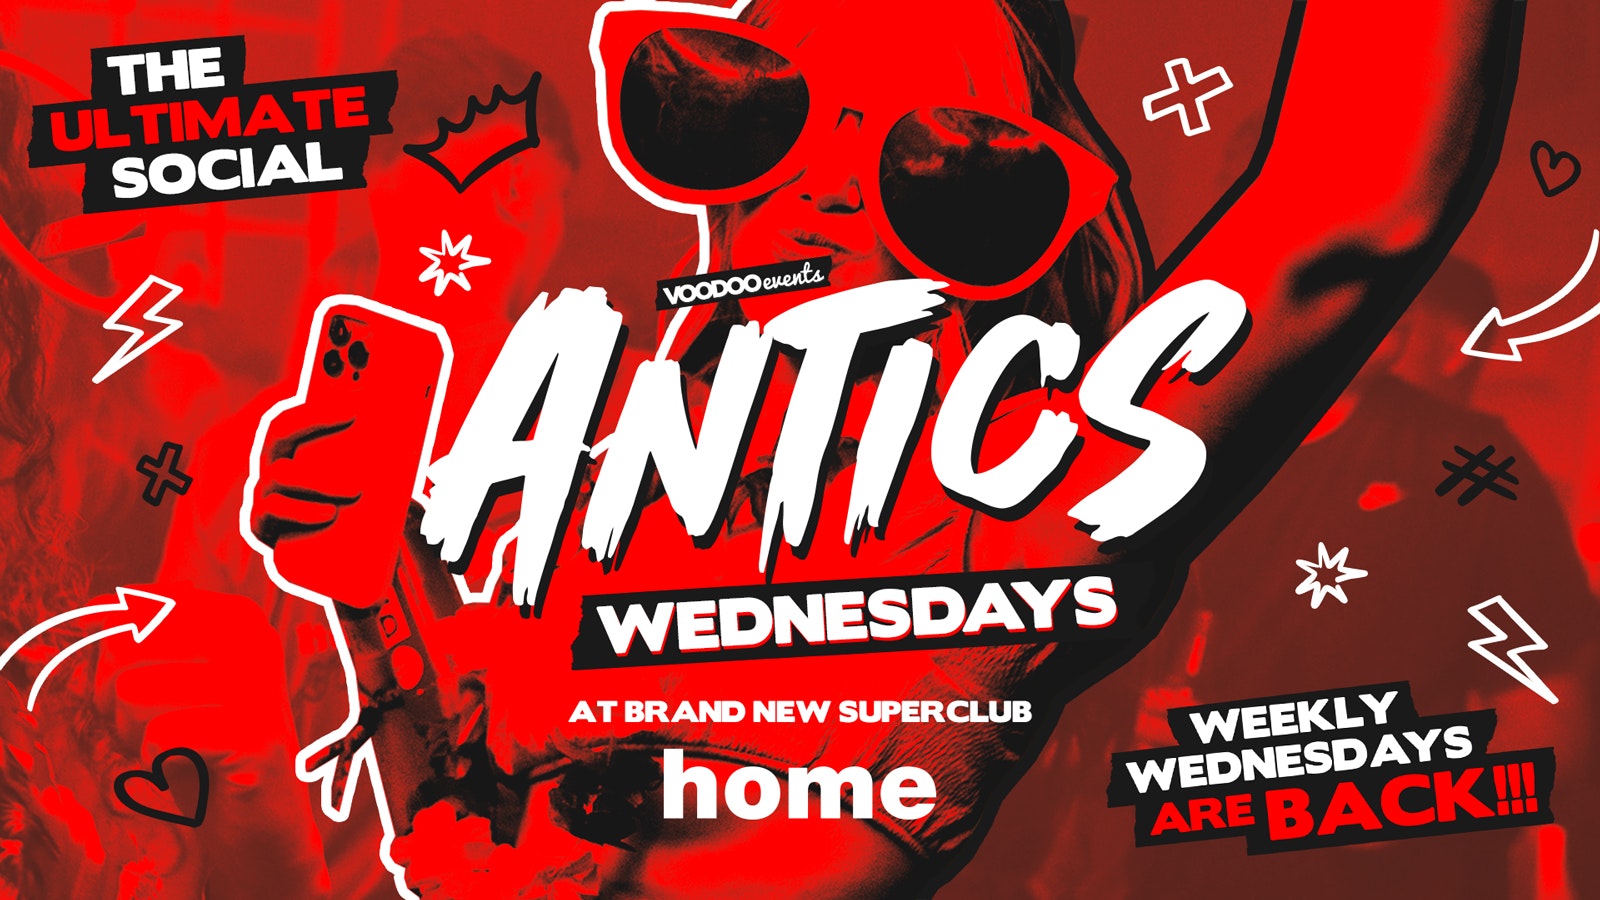 Antics @ THE BRAND NEW SUPER CLUB HOME – Wednesday 10th July